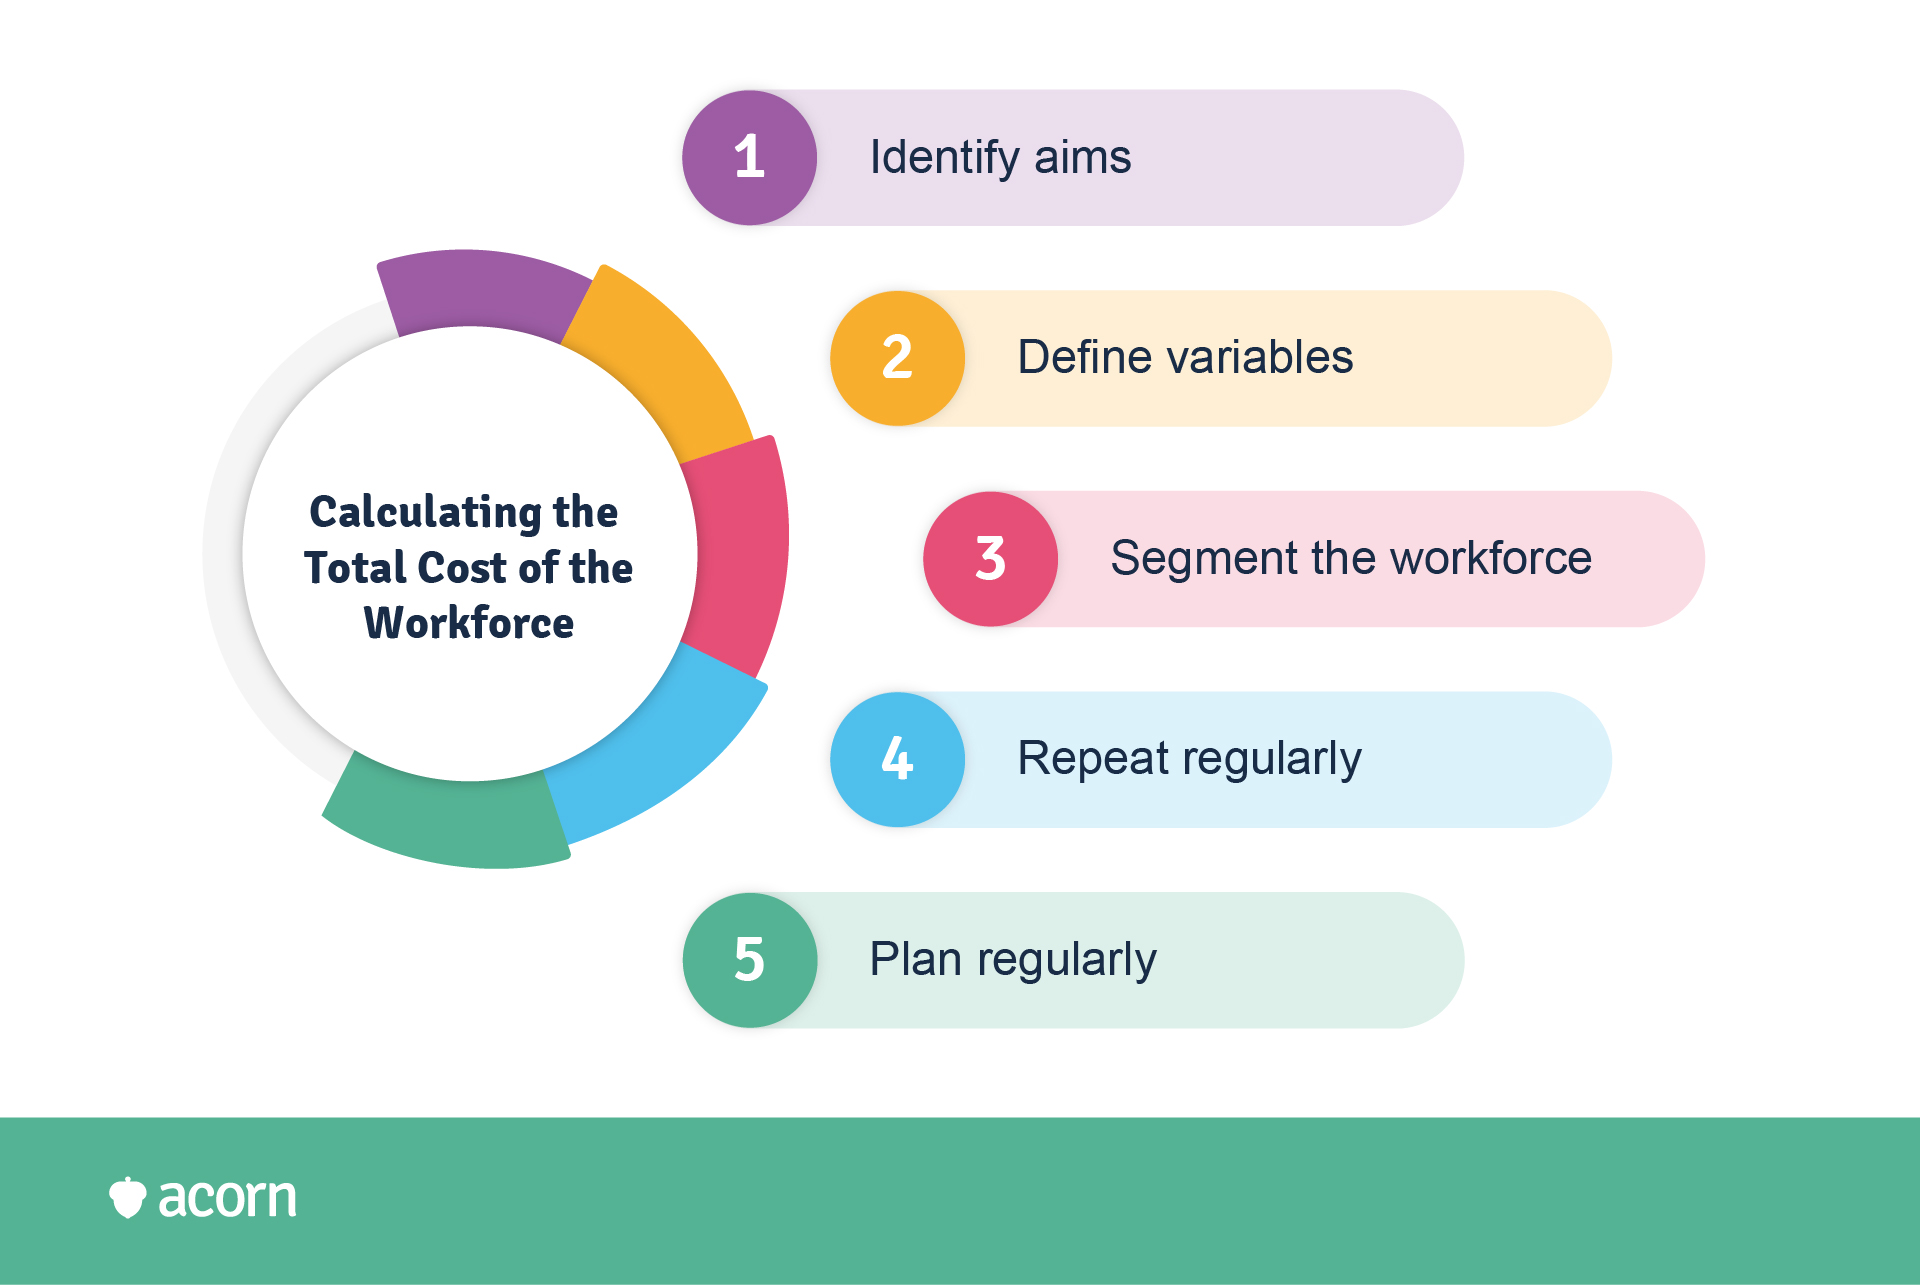 Best practices when calculating the total cost of the workforce